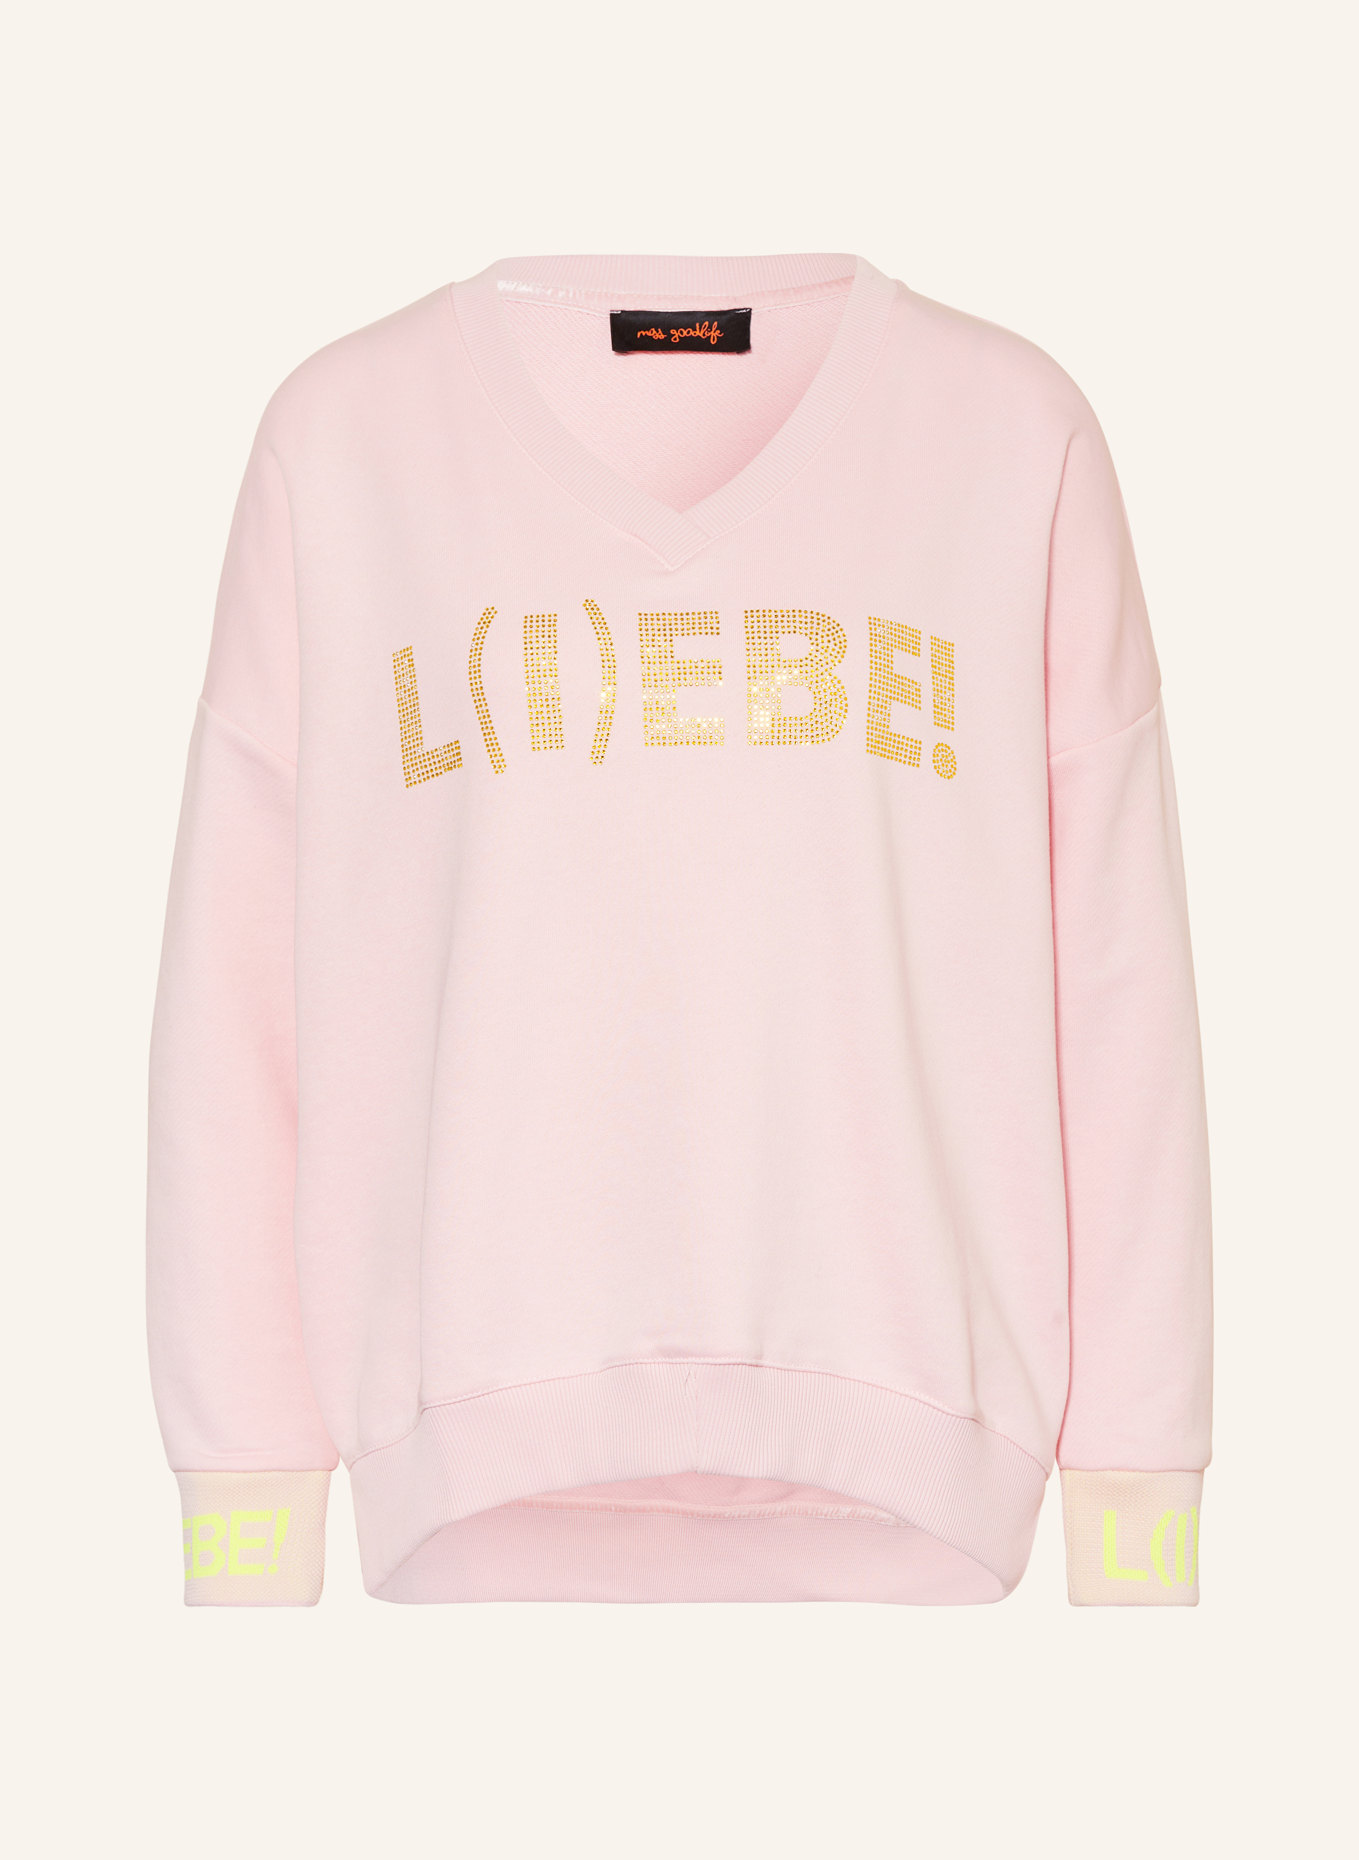 miss goodlife Sweatshirt with decorative gems, Color: PINK/ NEON GREEN (Image 1)